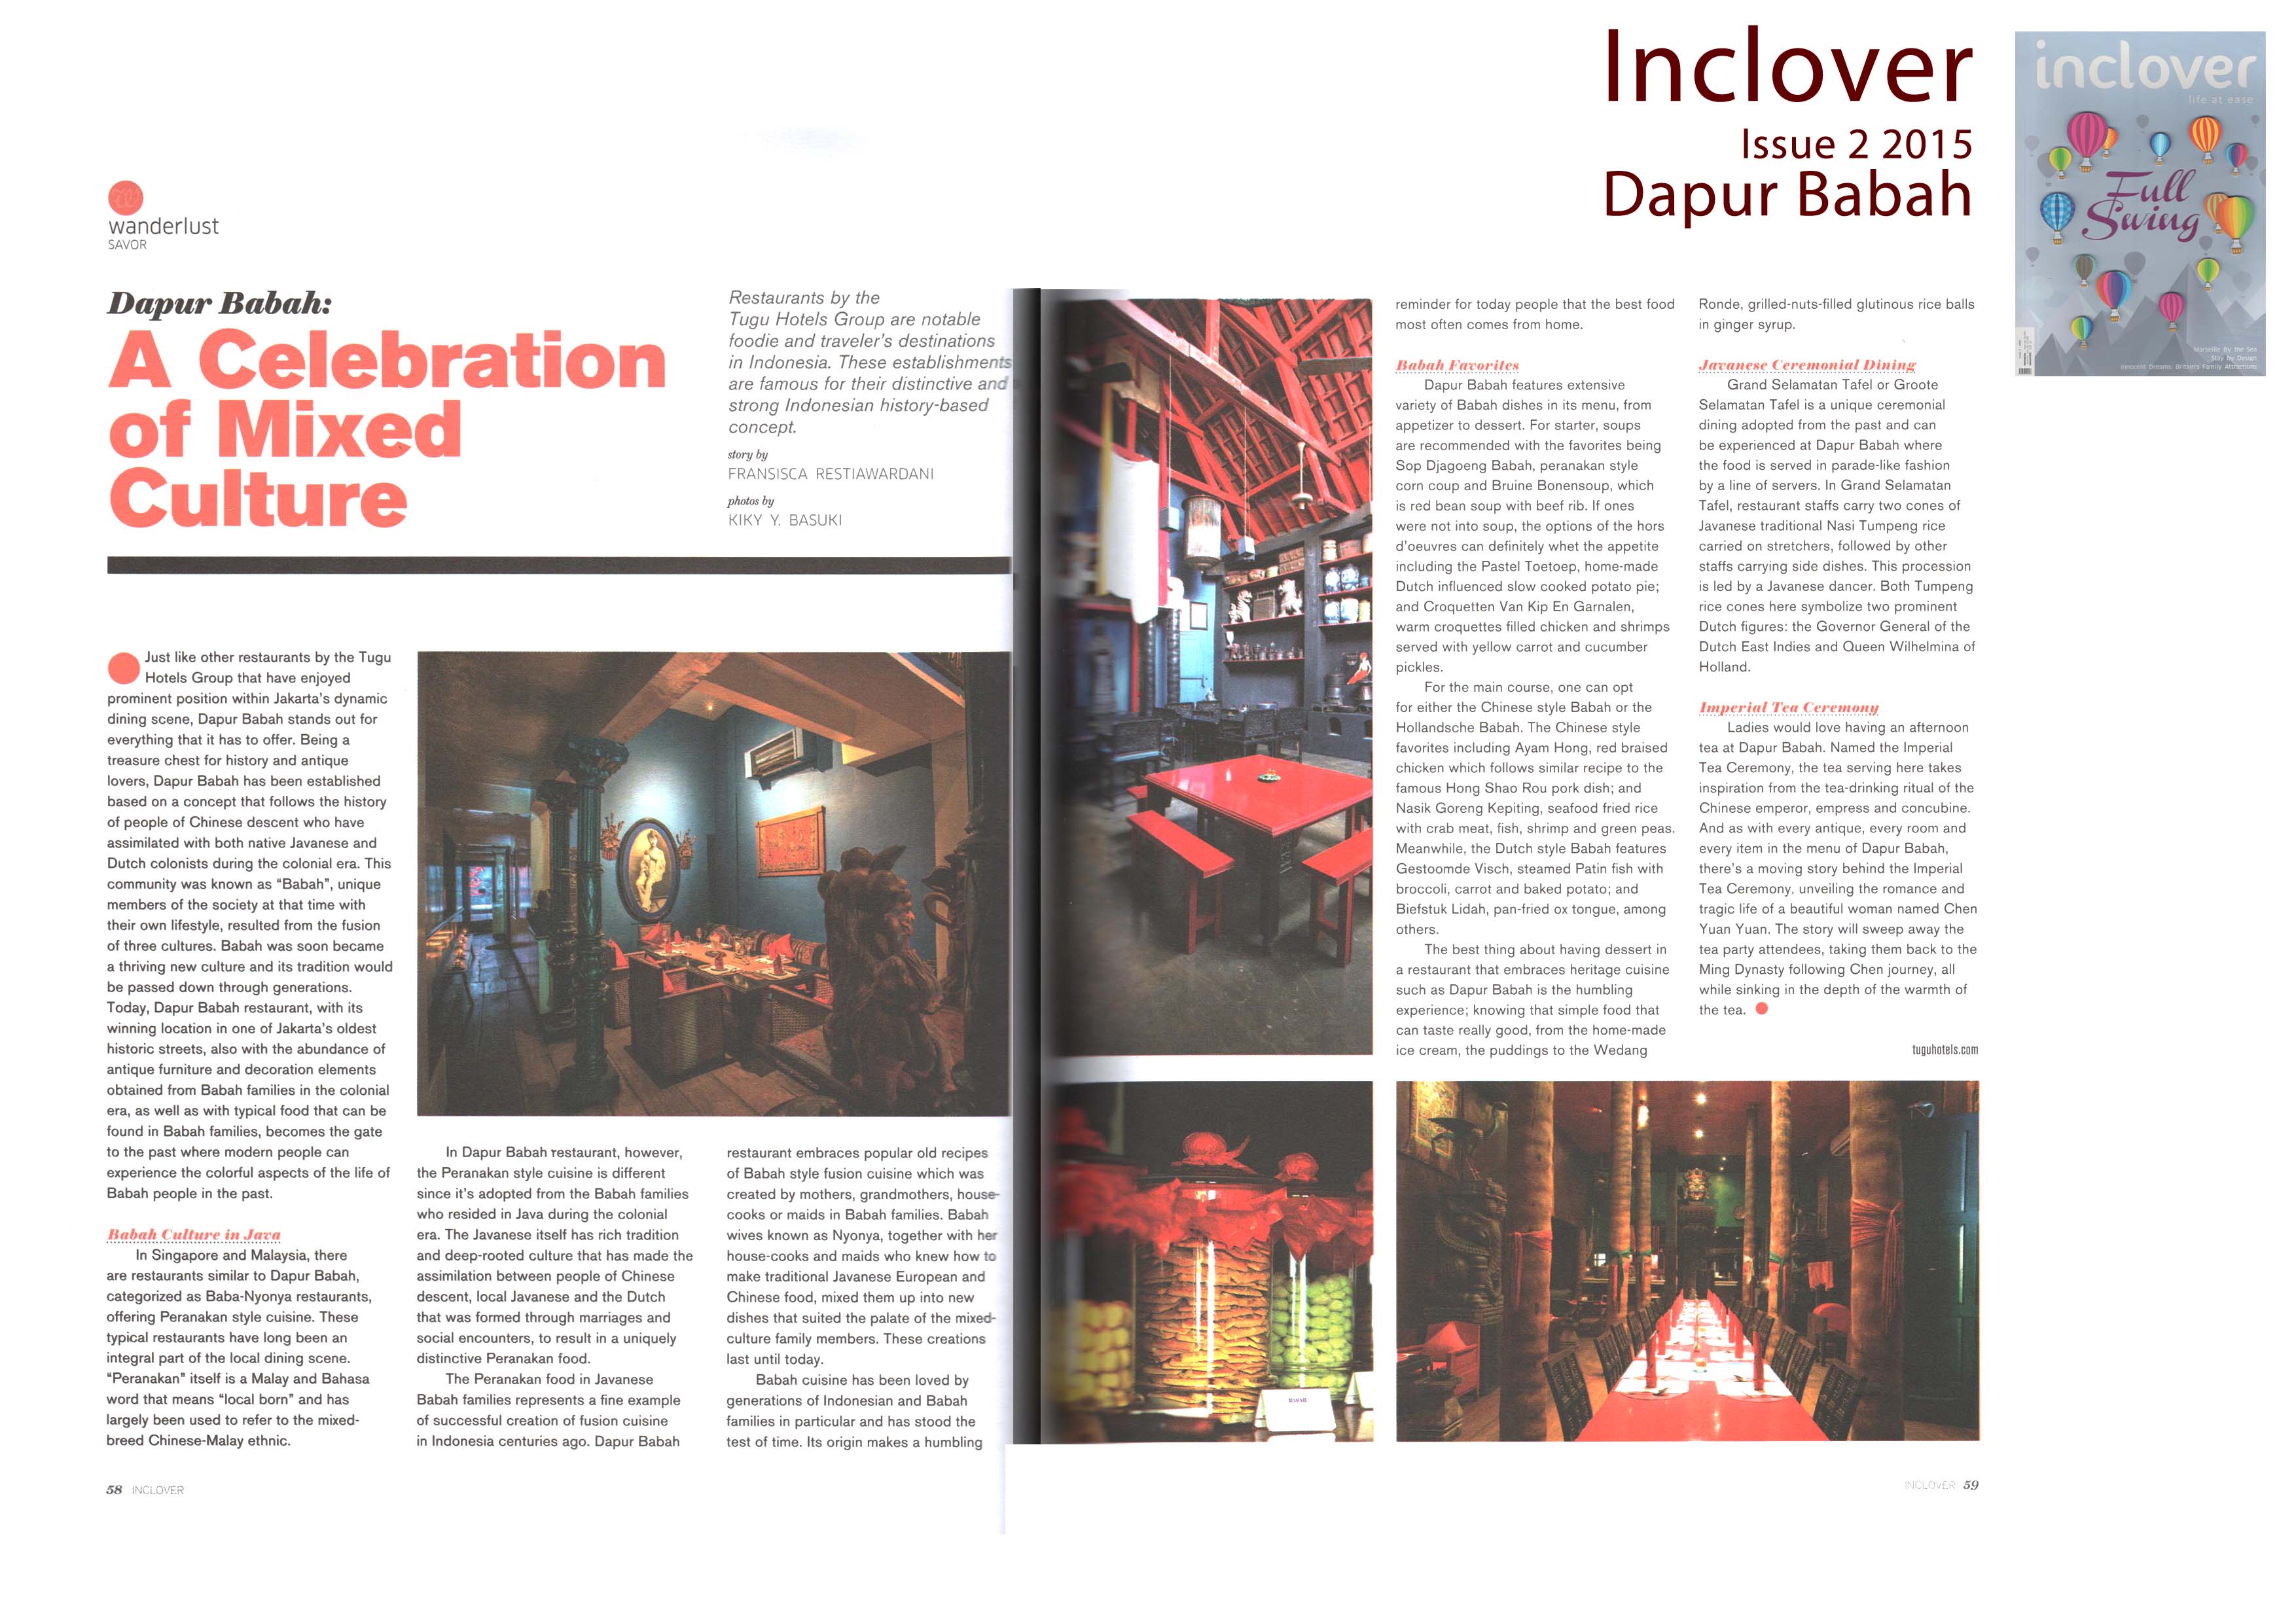 A Celebration of Mixed Culture - Dapur Babah - Inclover Issue 2 2015